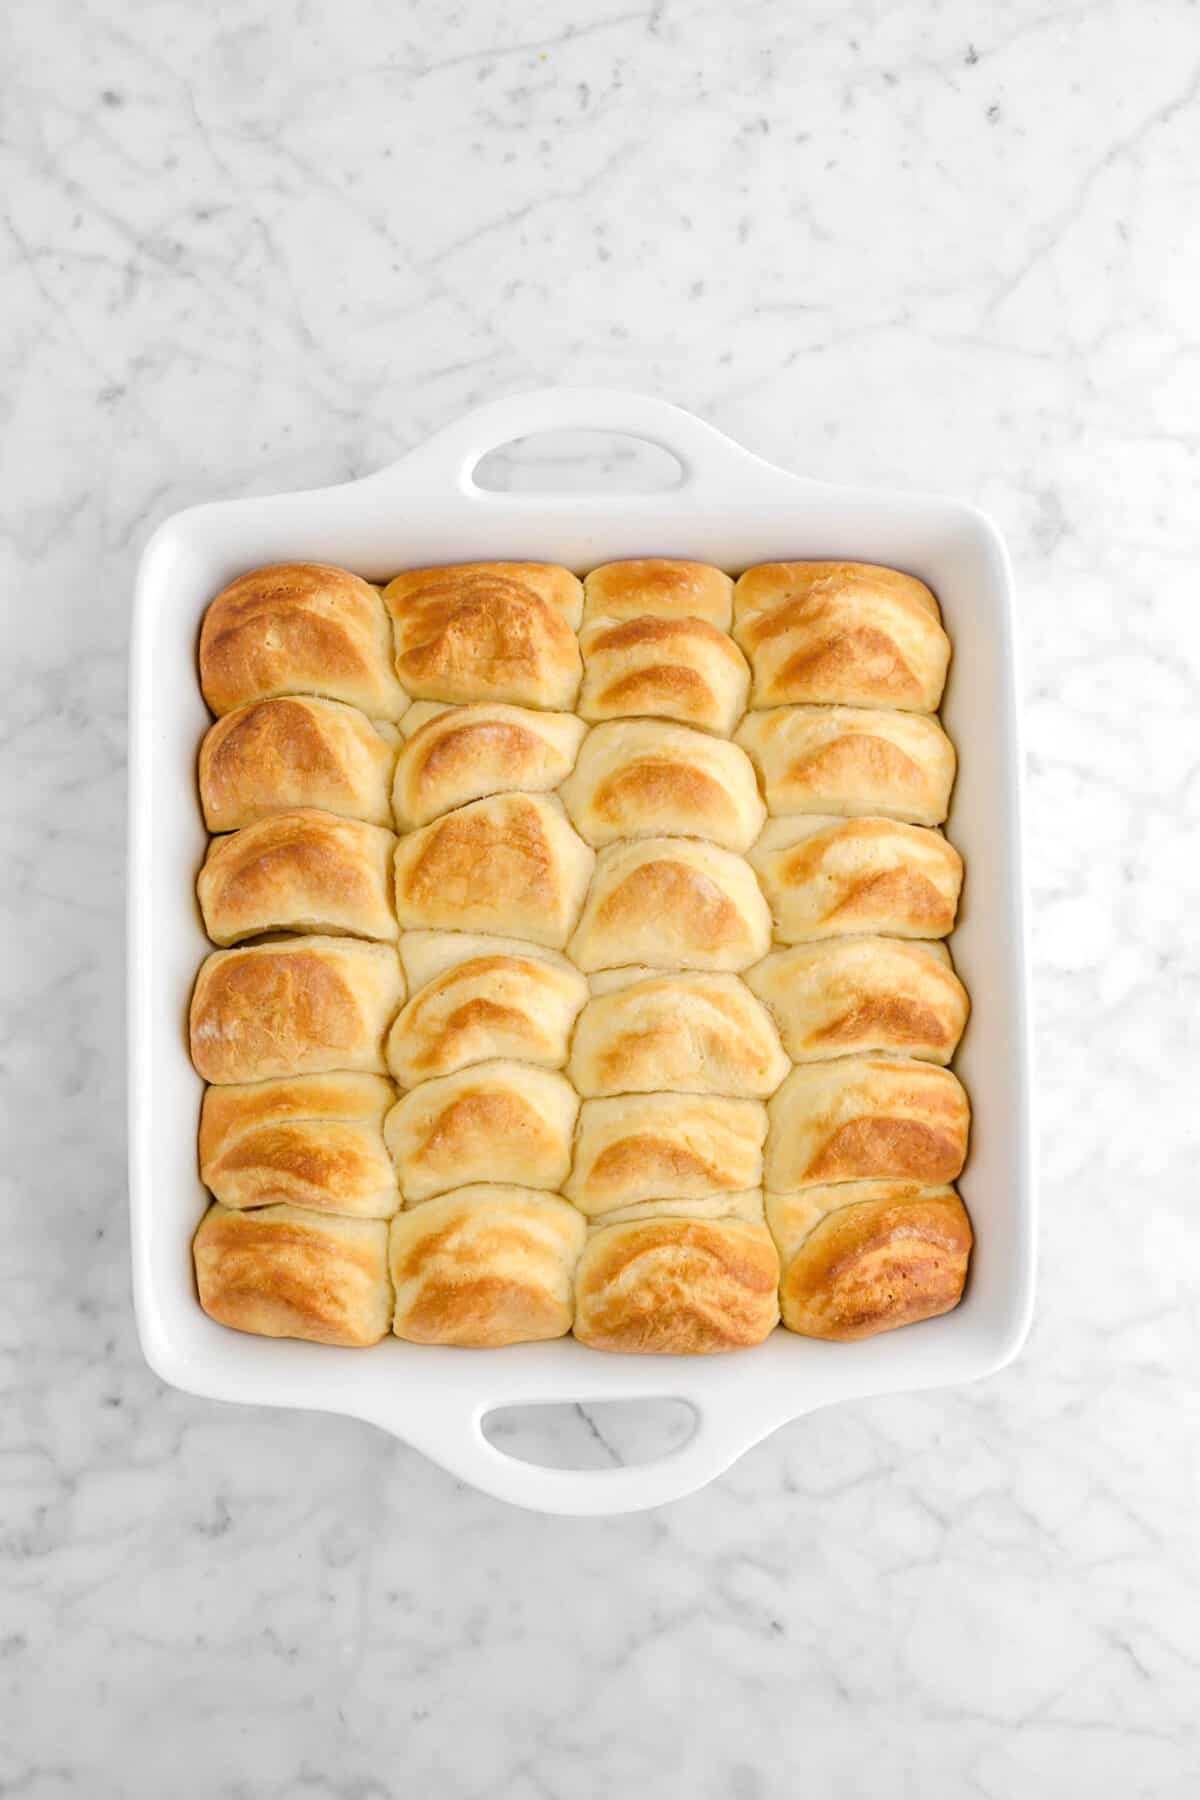 baked rolls in square casserole